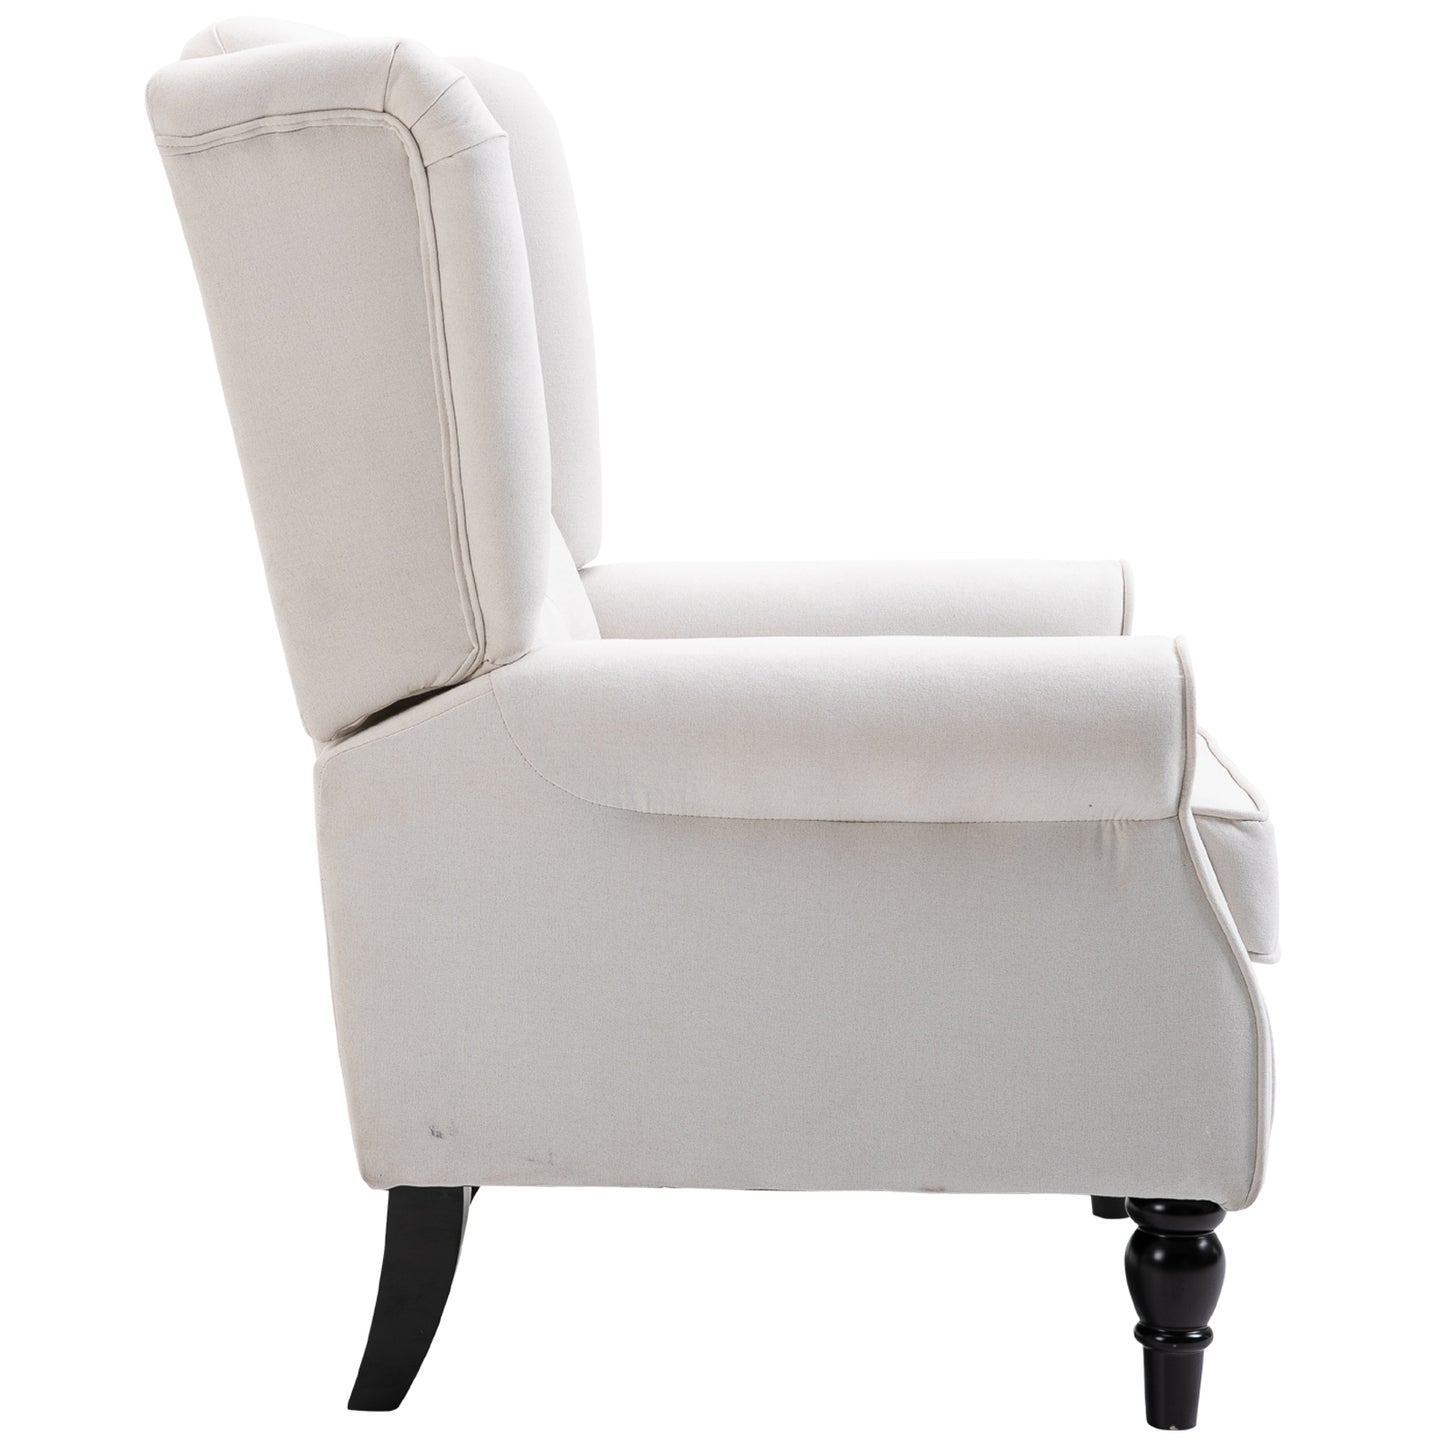 HOMCOM Wingback Accent Chair, Retro Button Tufted Upholstered Occasional Chair for Living Room, Bedroom, Cream White